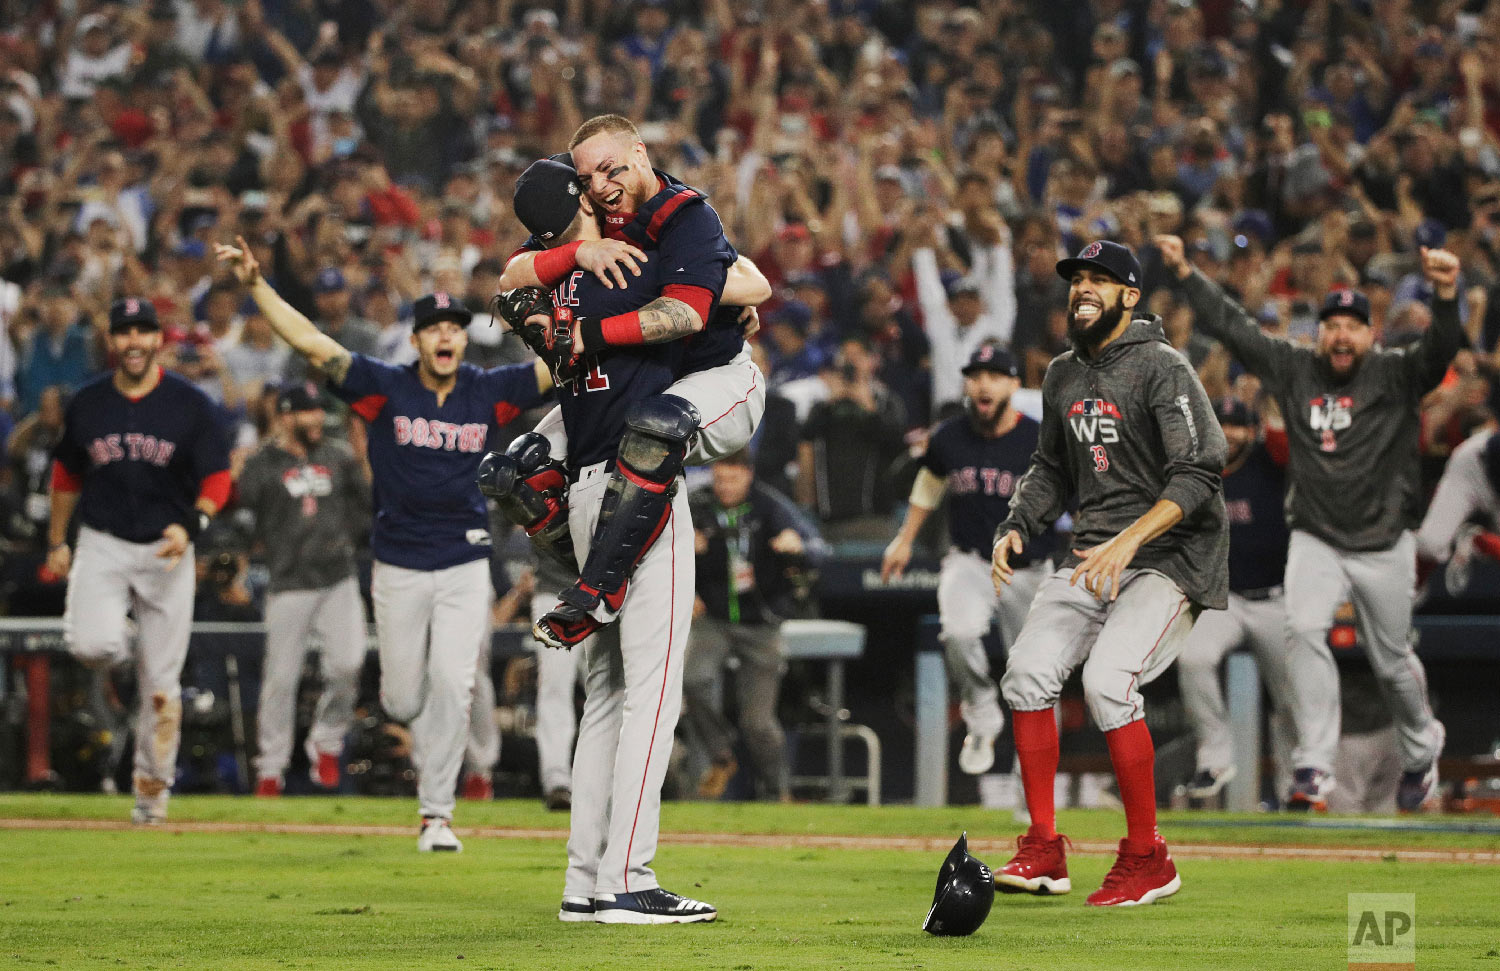  The Boston Red Sox celebrate after Game 5 of baseball's World Series against the Los Angeles Dodgers on Oct. 28, 2018, in Los Angeles. The Red Sox won the game 5-1 to win the series 4 games to 1. (AP Photo/Jae C. Hong) 